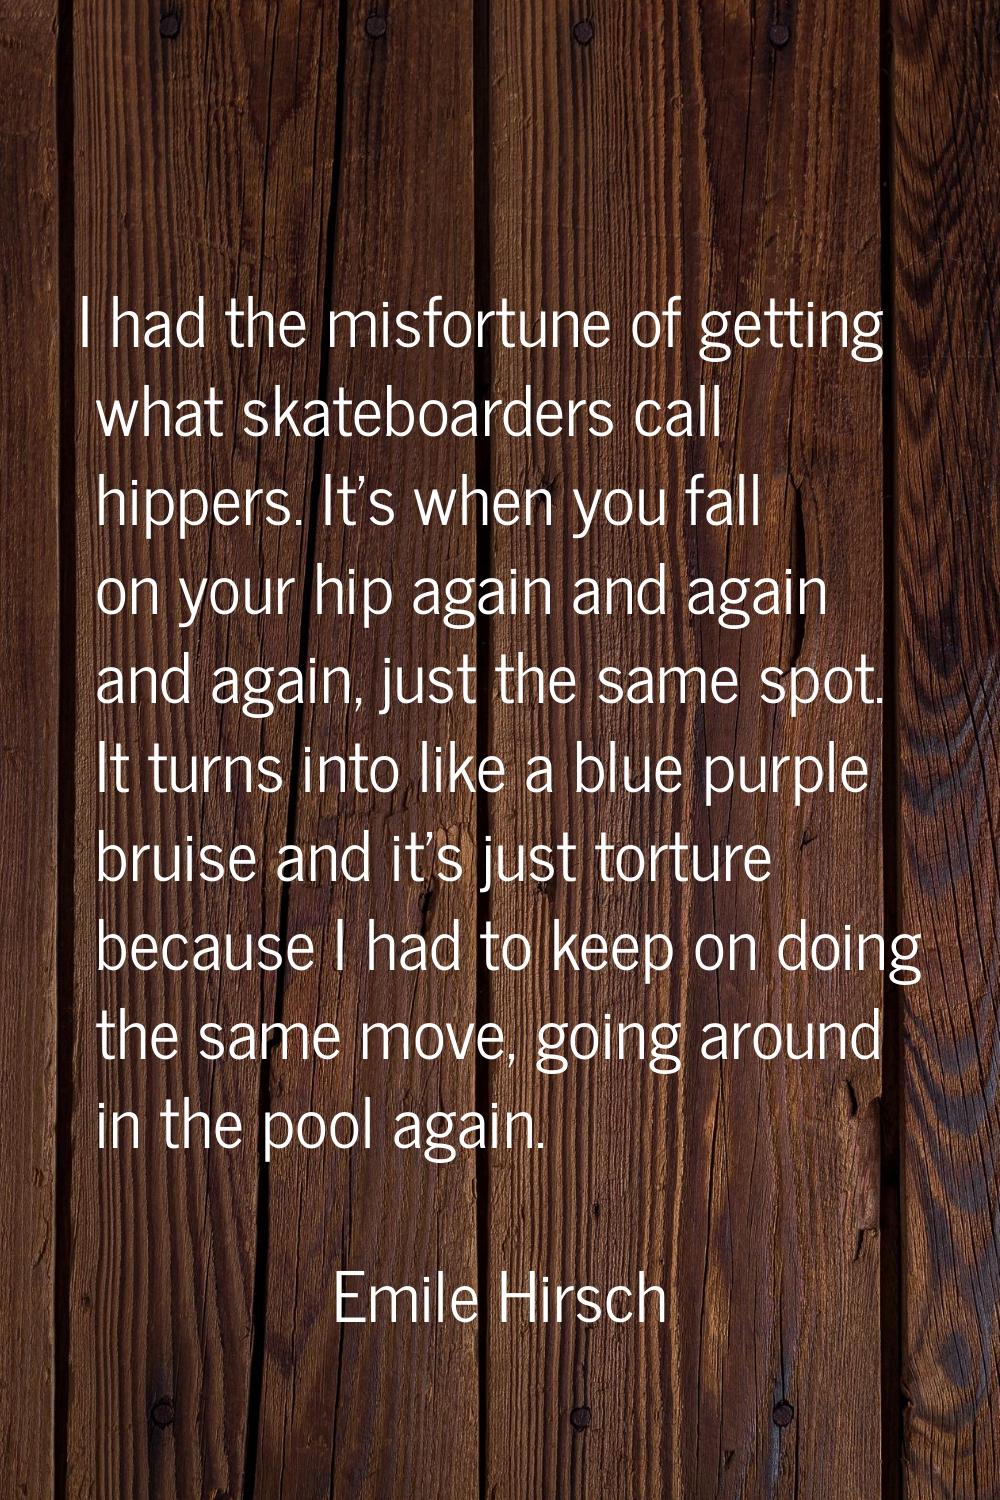 I had the misfortune of getting what skateboarders call hippers. It's when you fall on your hip aga